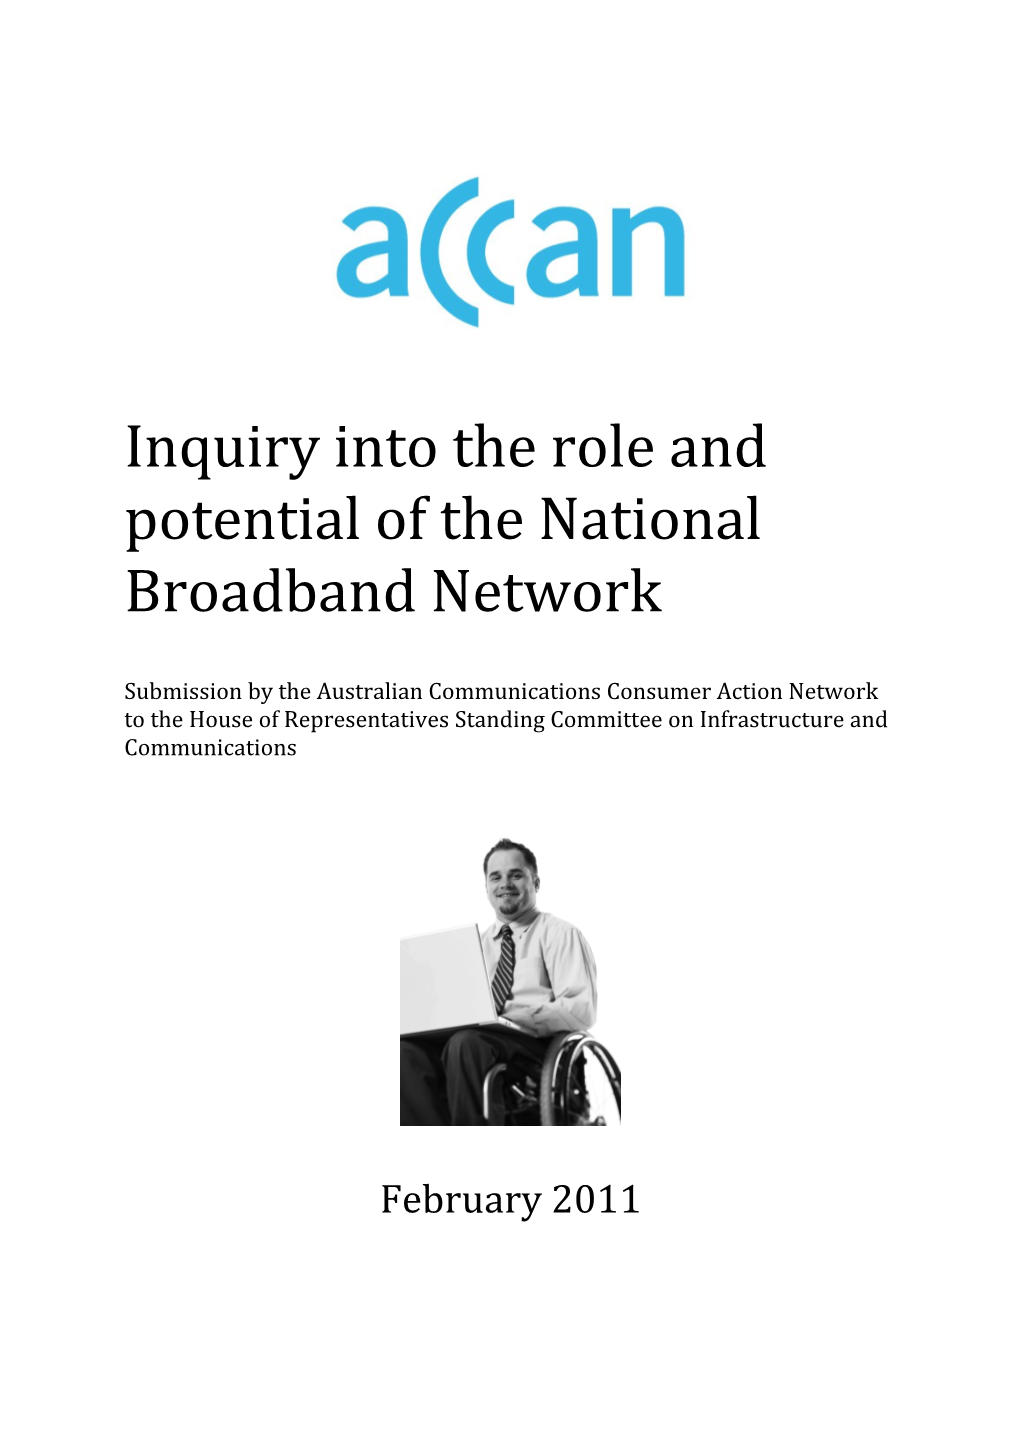 Inquiry Into the Role and Potential of the National Broadband Network